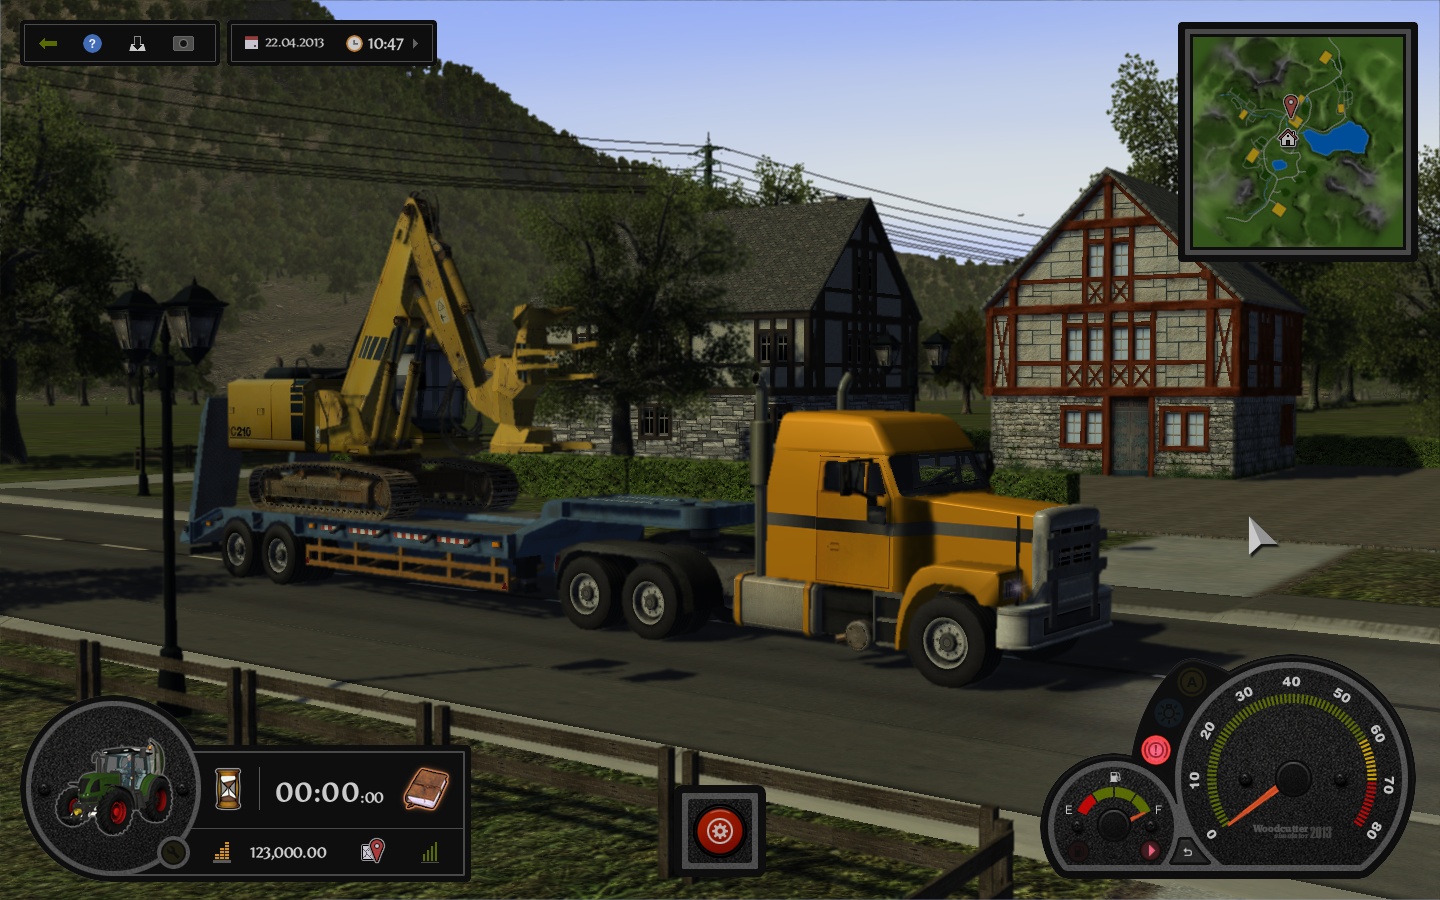 ... PC Games Download: Woodcutter Simulator 2013 Download Mediafire for PC